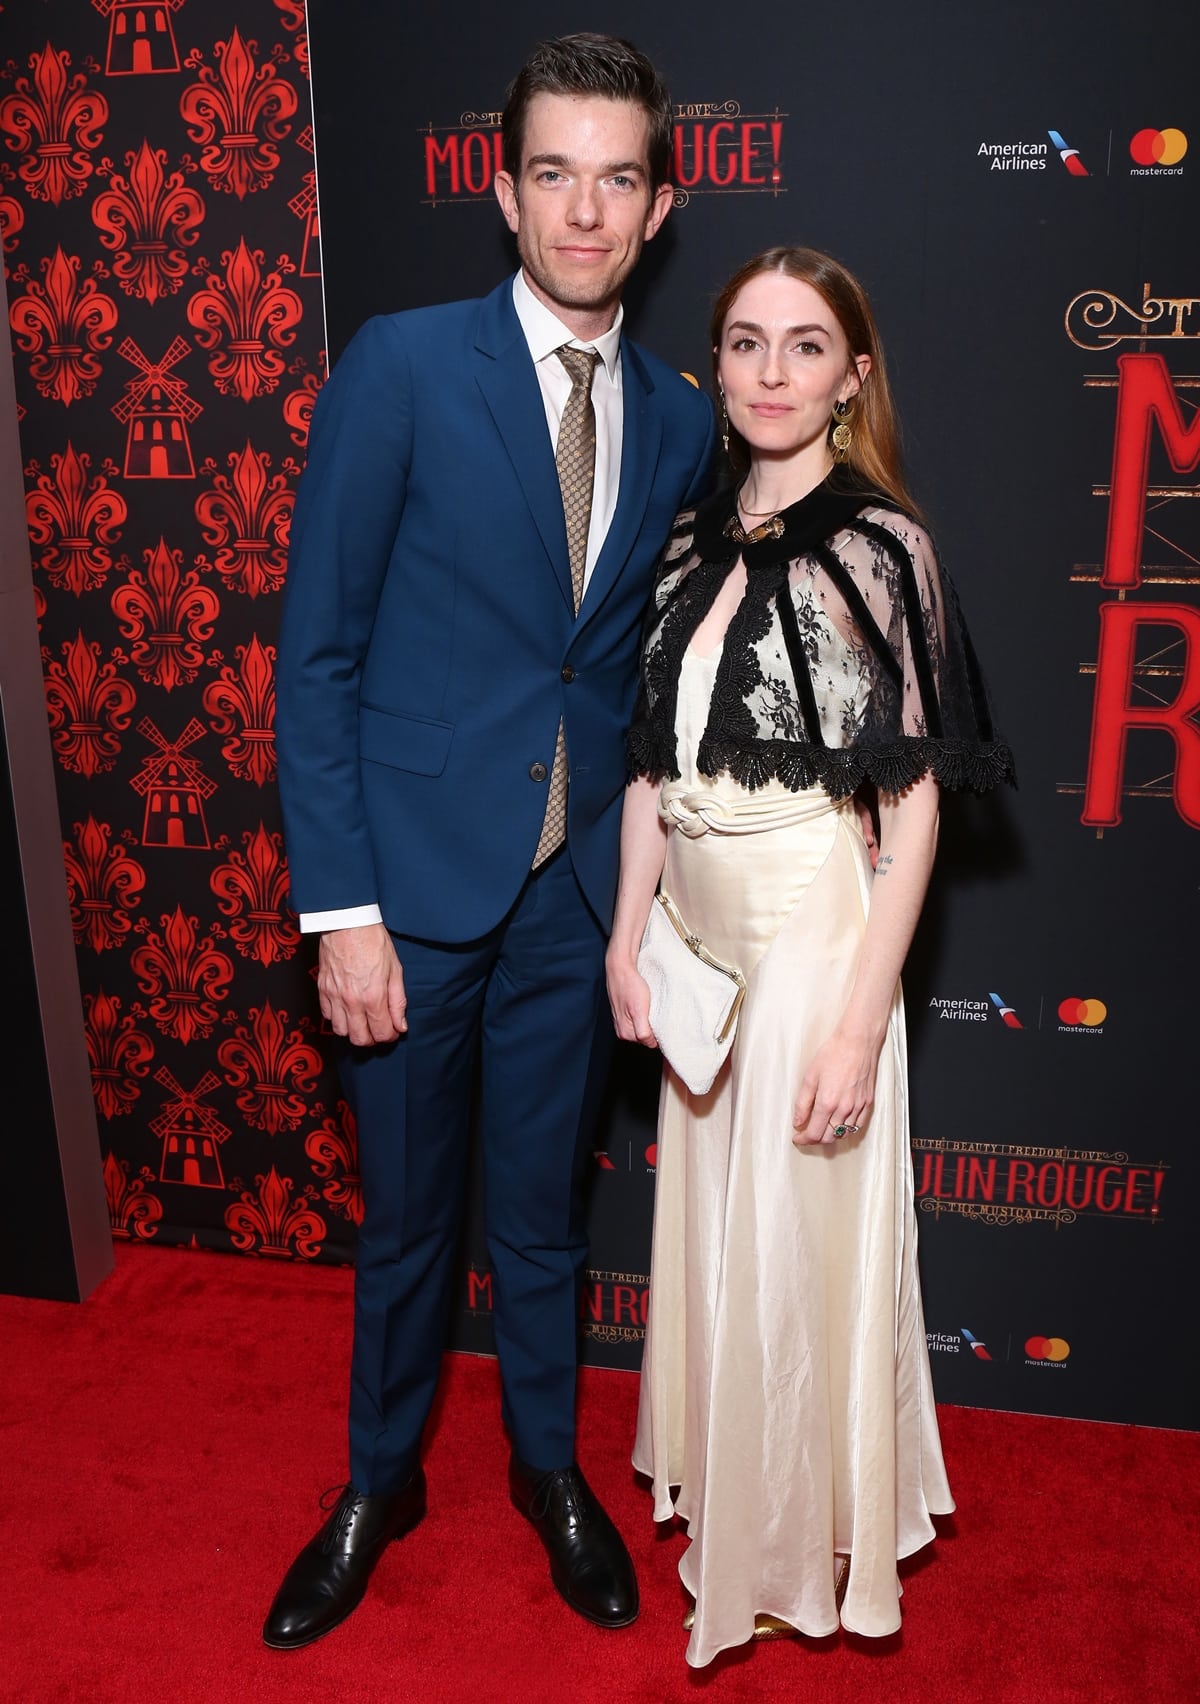 John Mulaney and Annamarie Tendler split in May 2021 after six years of marriage